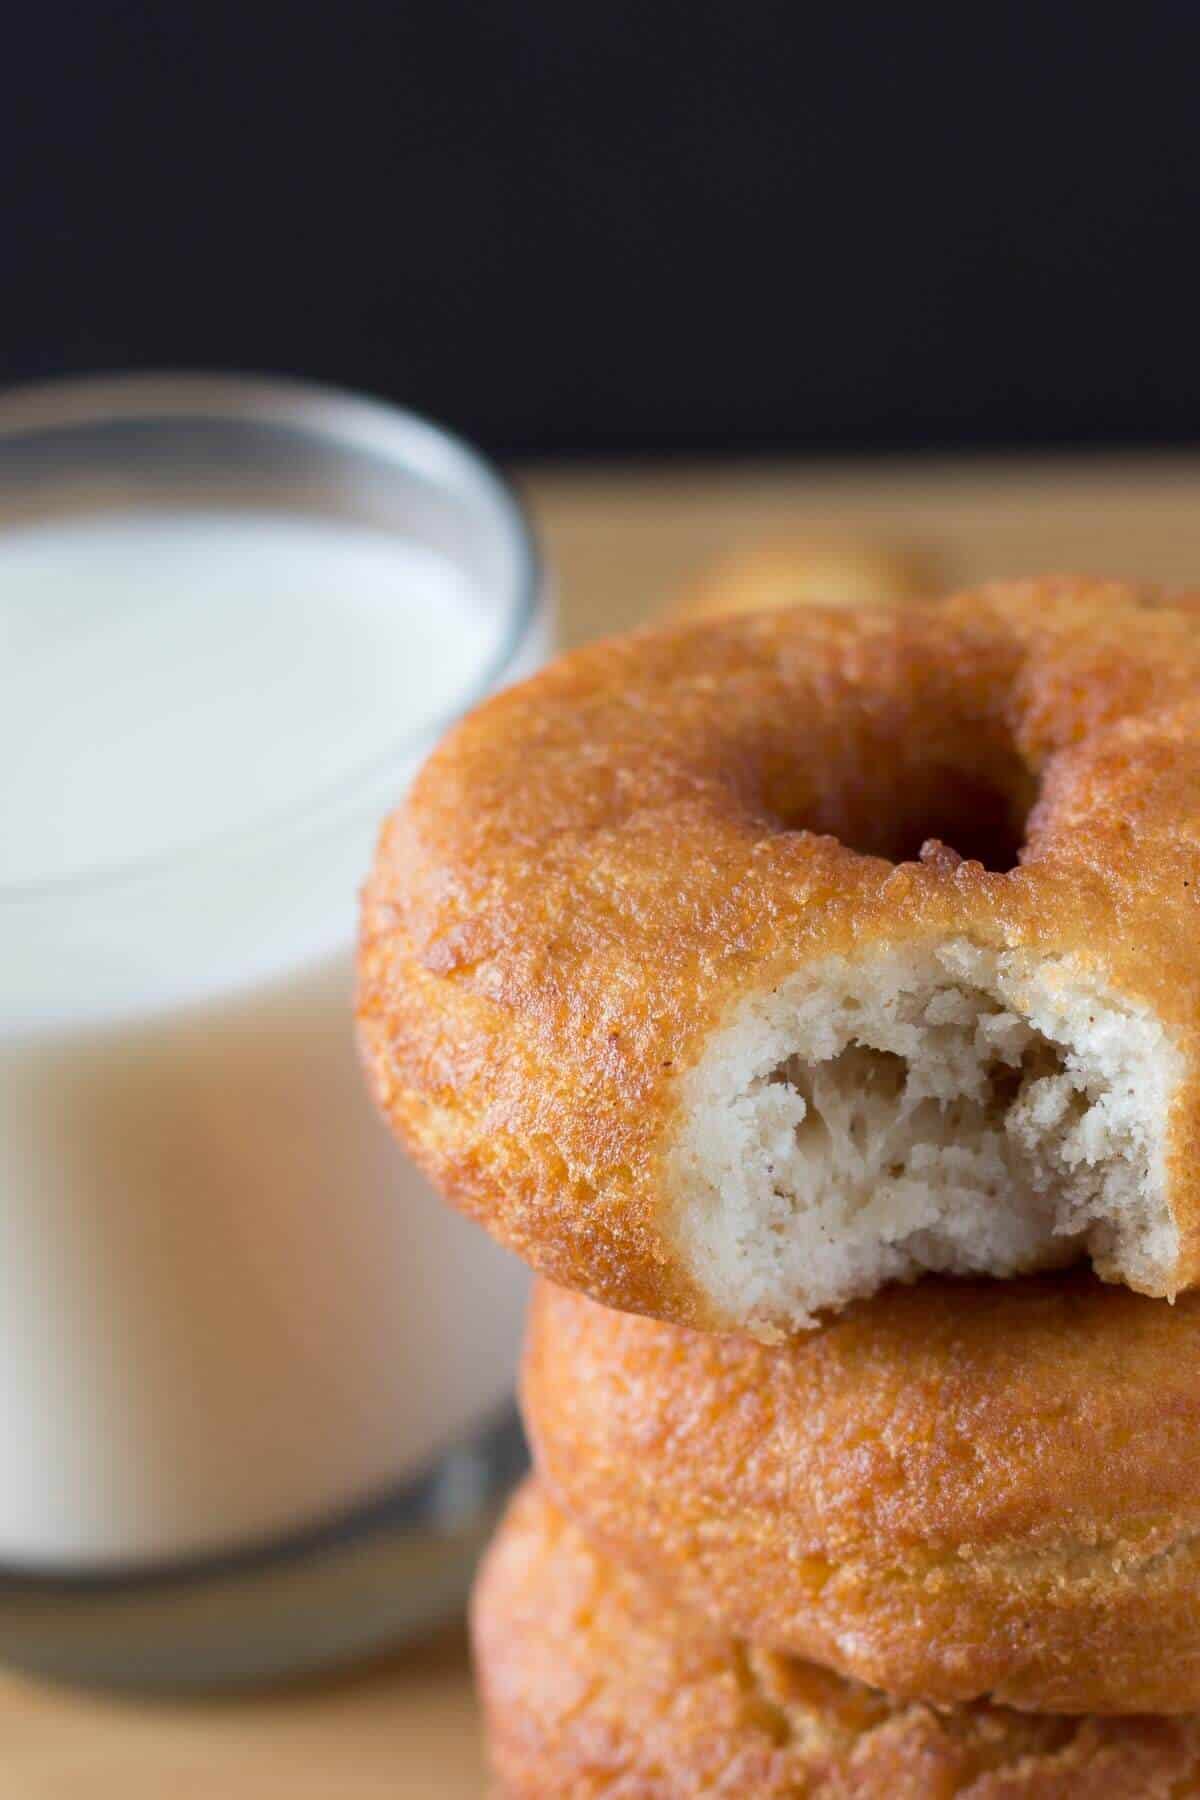 Ready for the MOST delicious doughnuts? Make these Old-Fashioned Cake Doughnuts at home and turn your kitchen into the ultimate bakery!